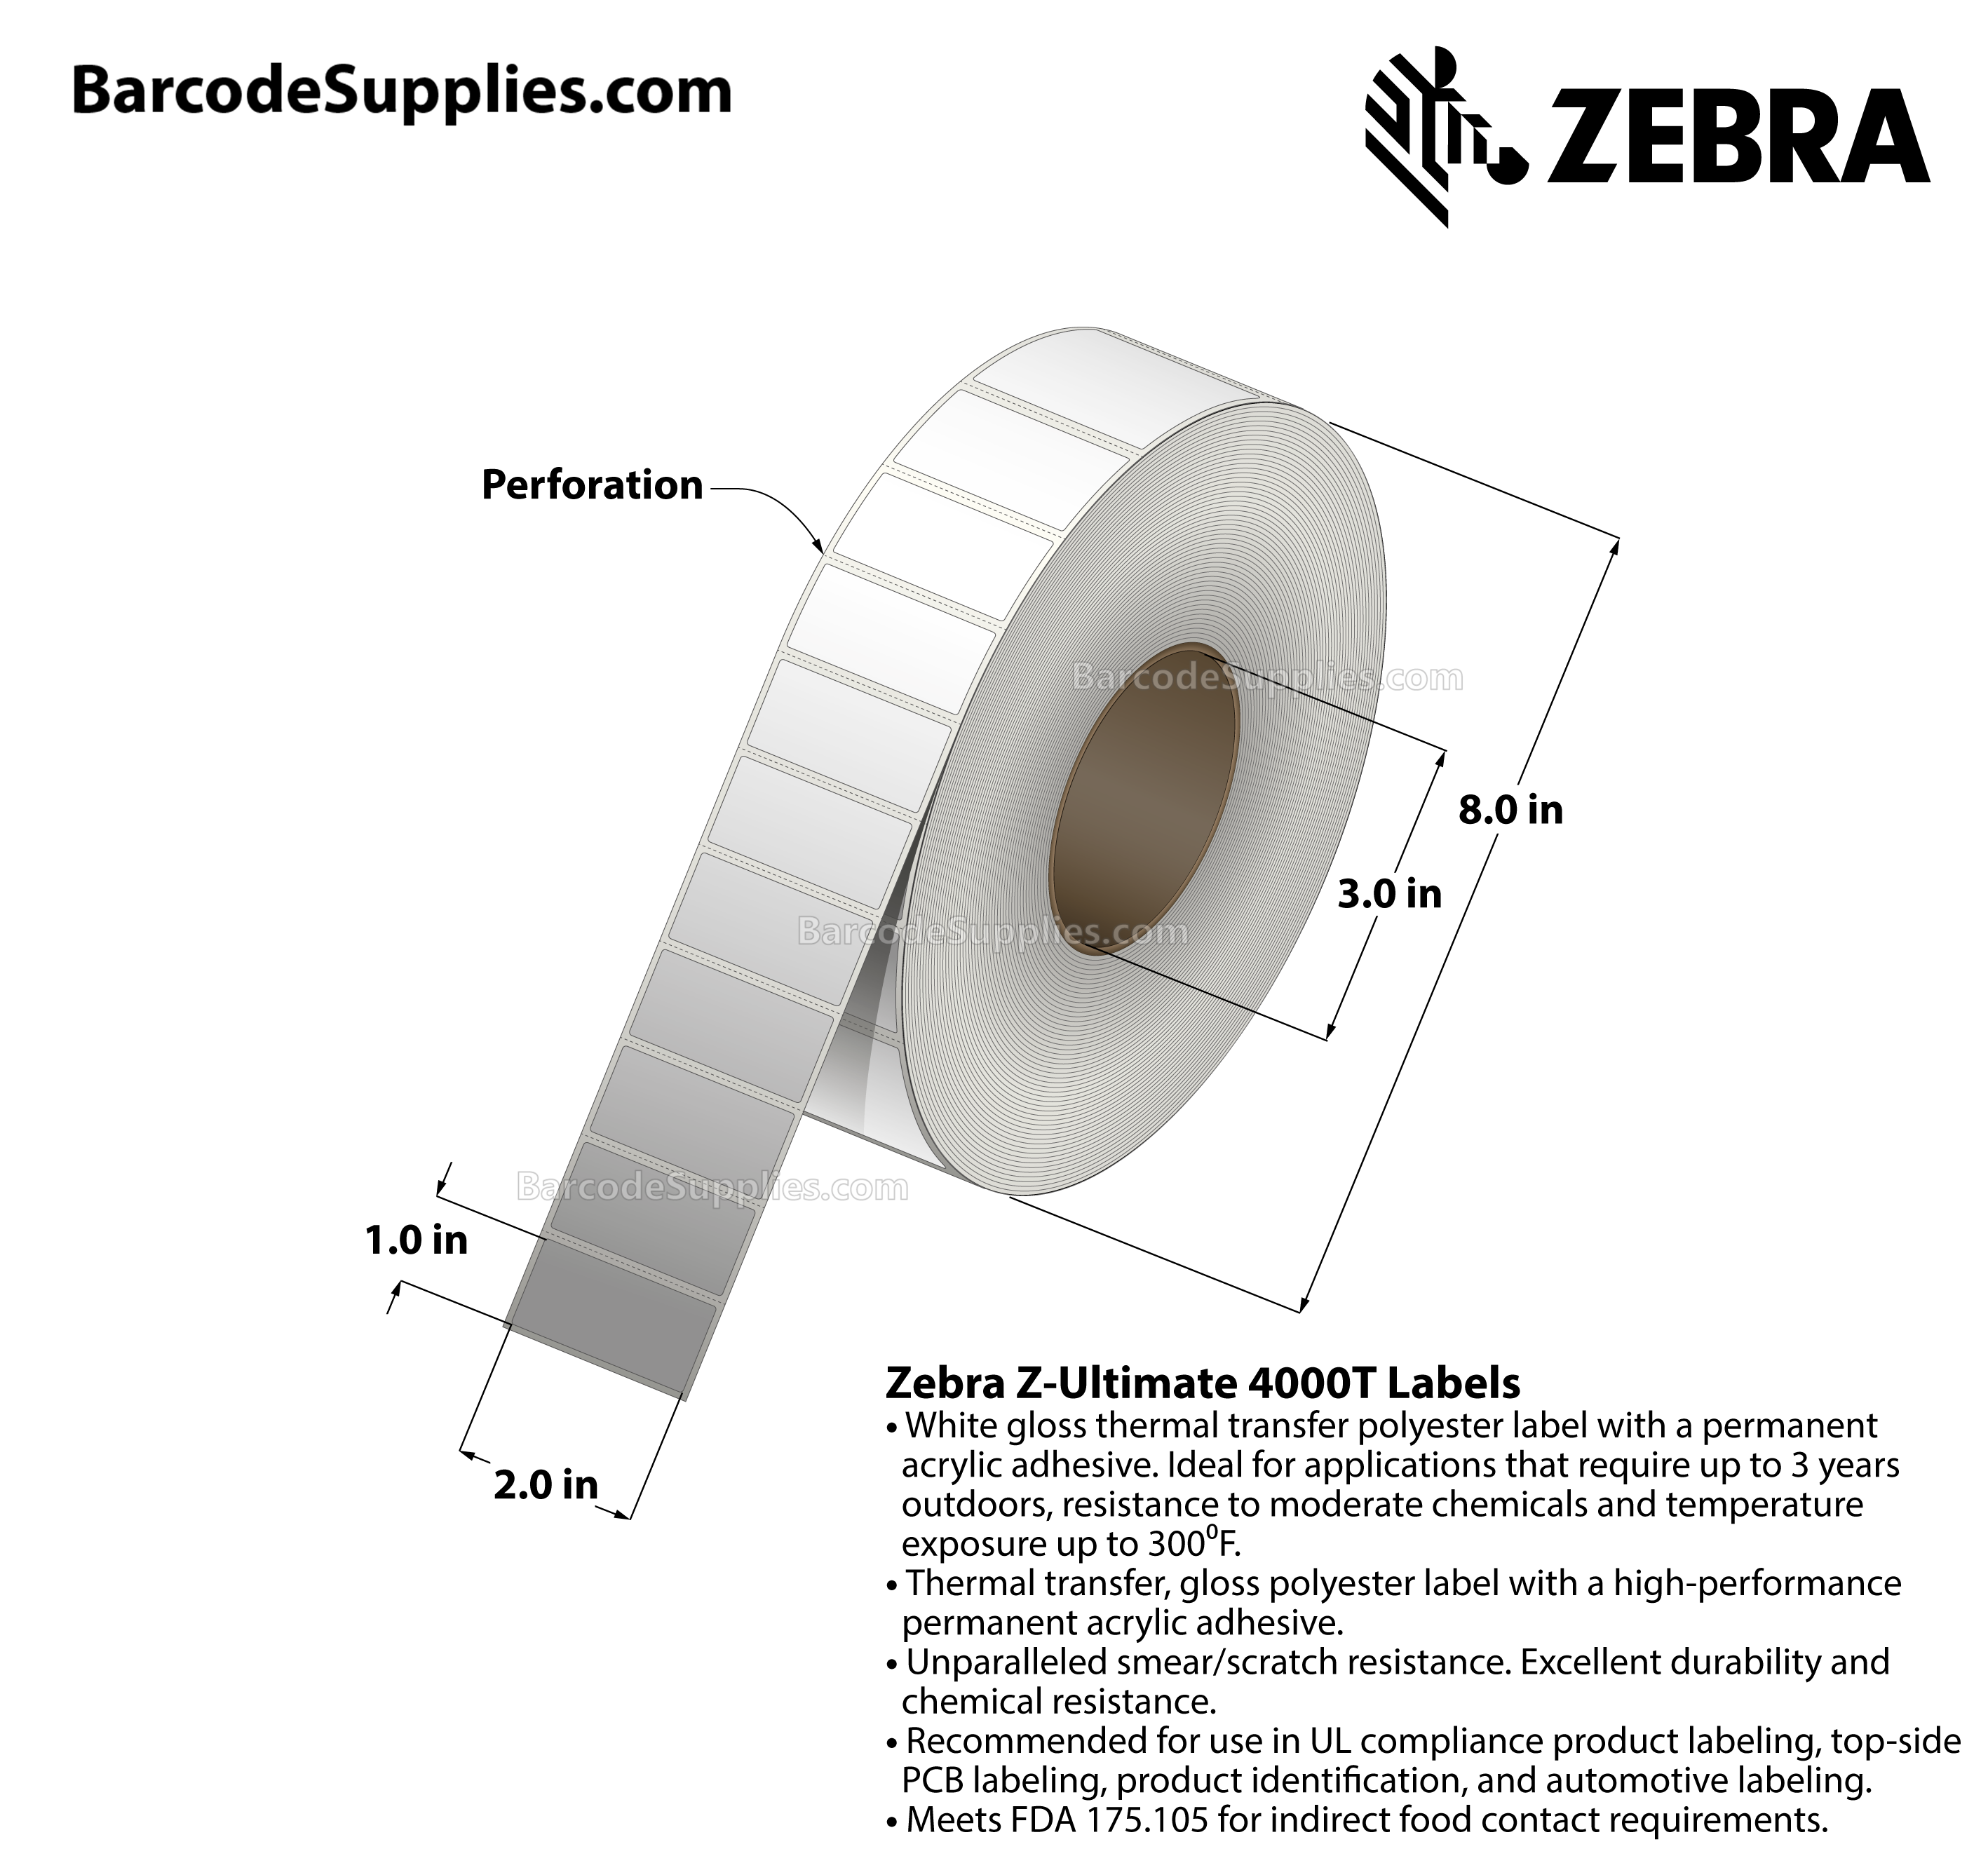 2 x 1 Thermal Transfer White Z-Ultimate 4000T Labels With Permanent Adhesive - Perforated - 5570 Labels Per Roll - Carton Of 4 Rolls - 22280 Labels Total - MPN: 10011708